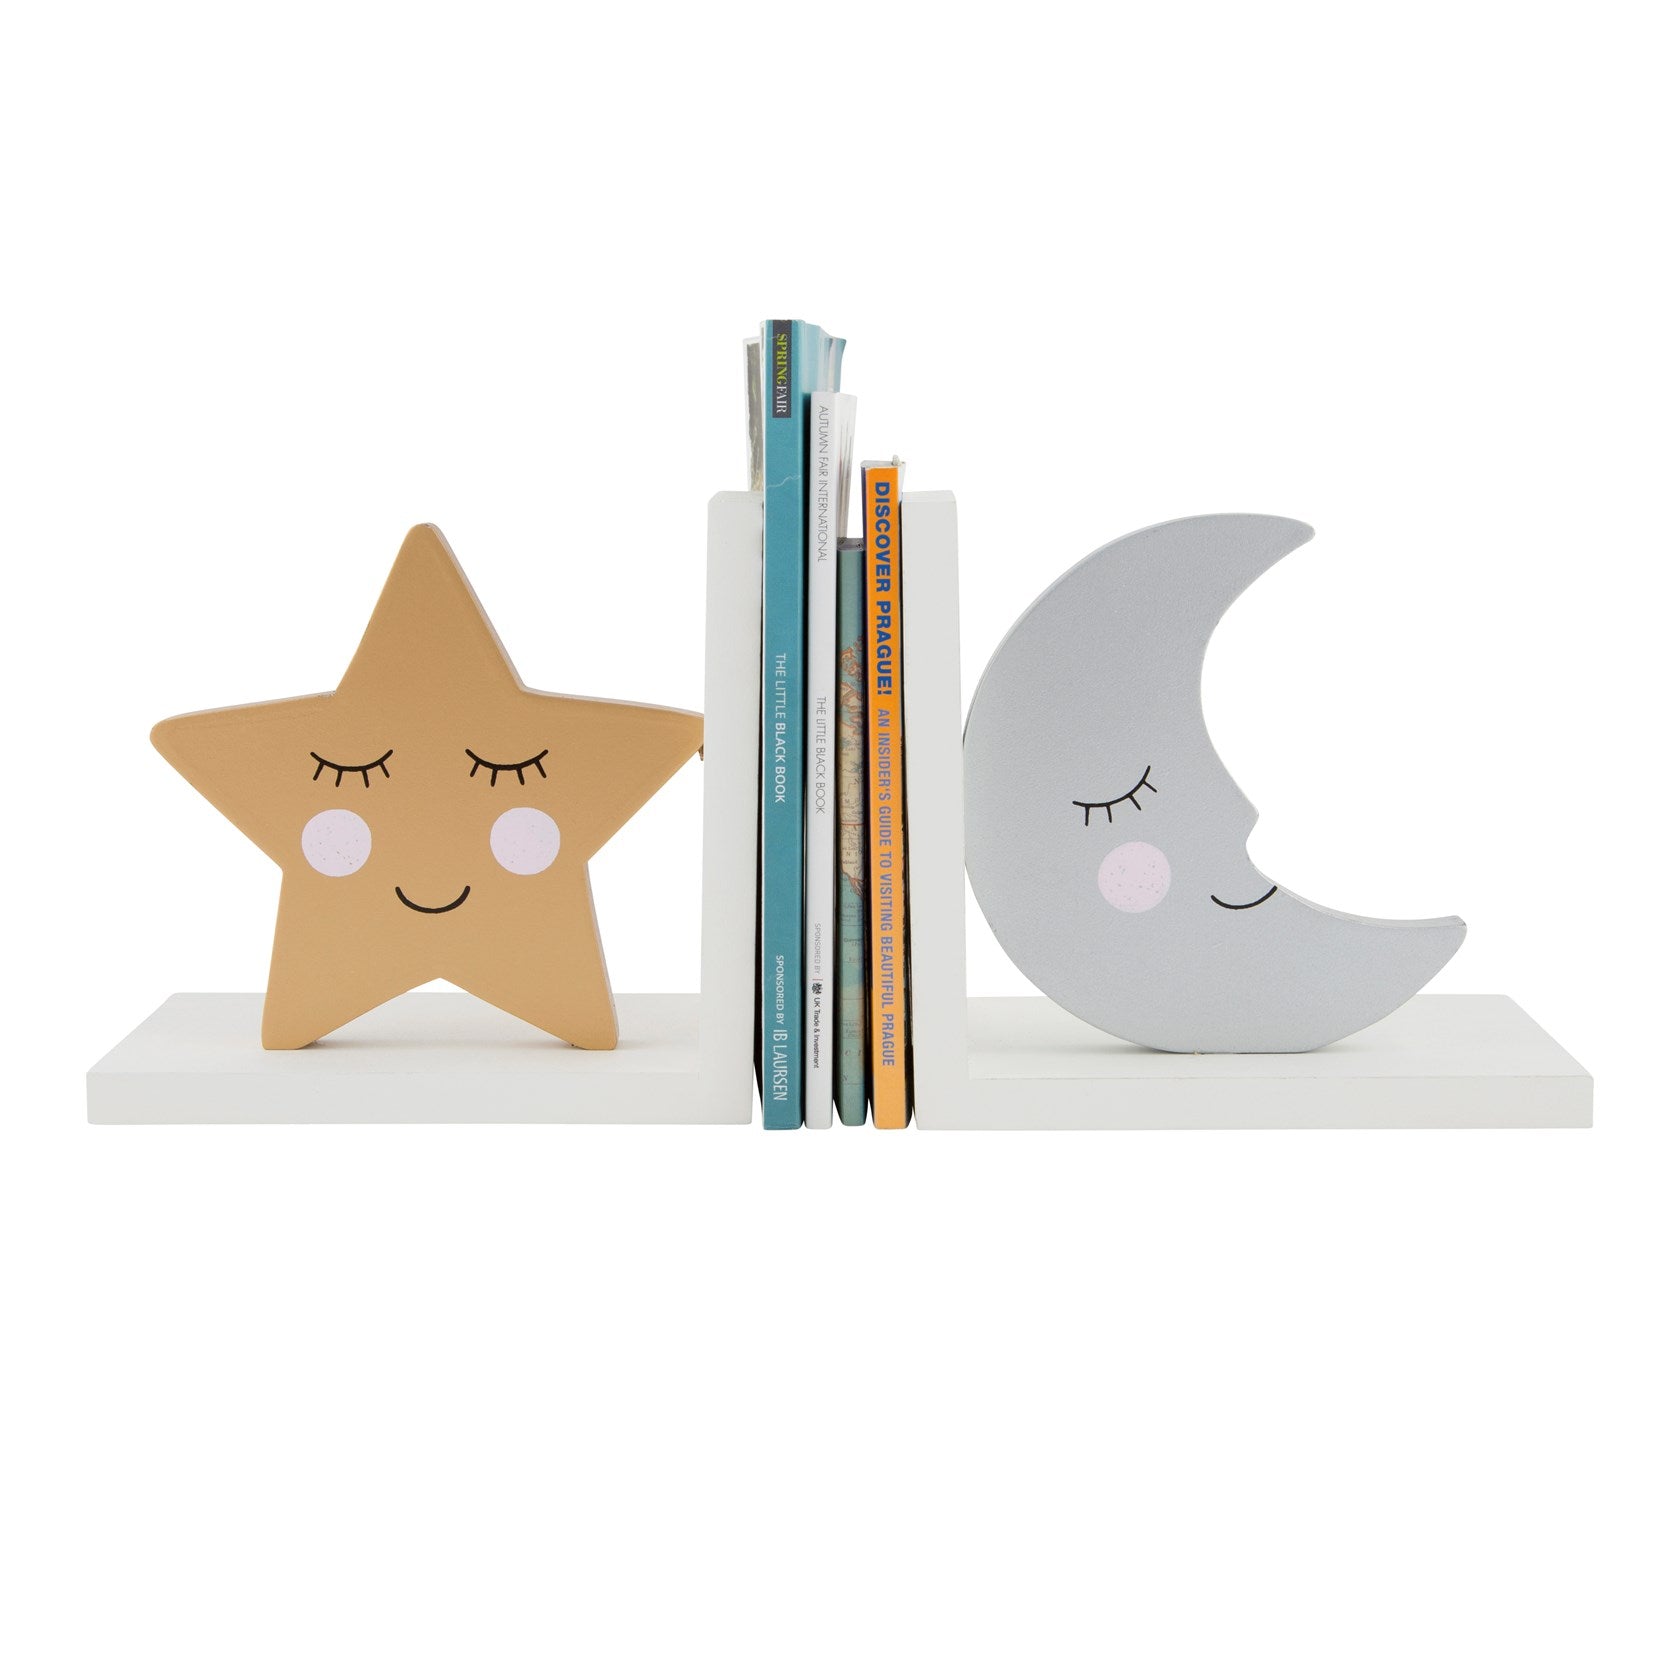 Star and Moon bookends with books inbetween